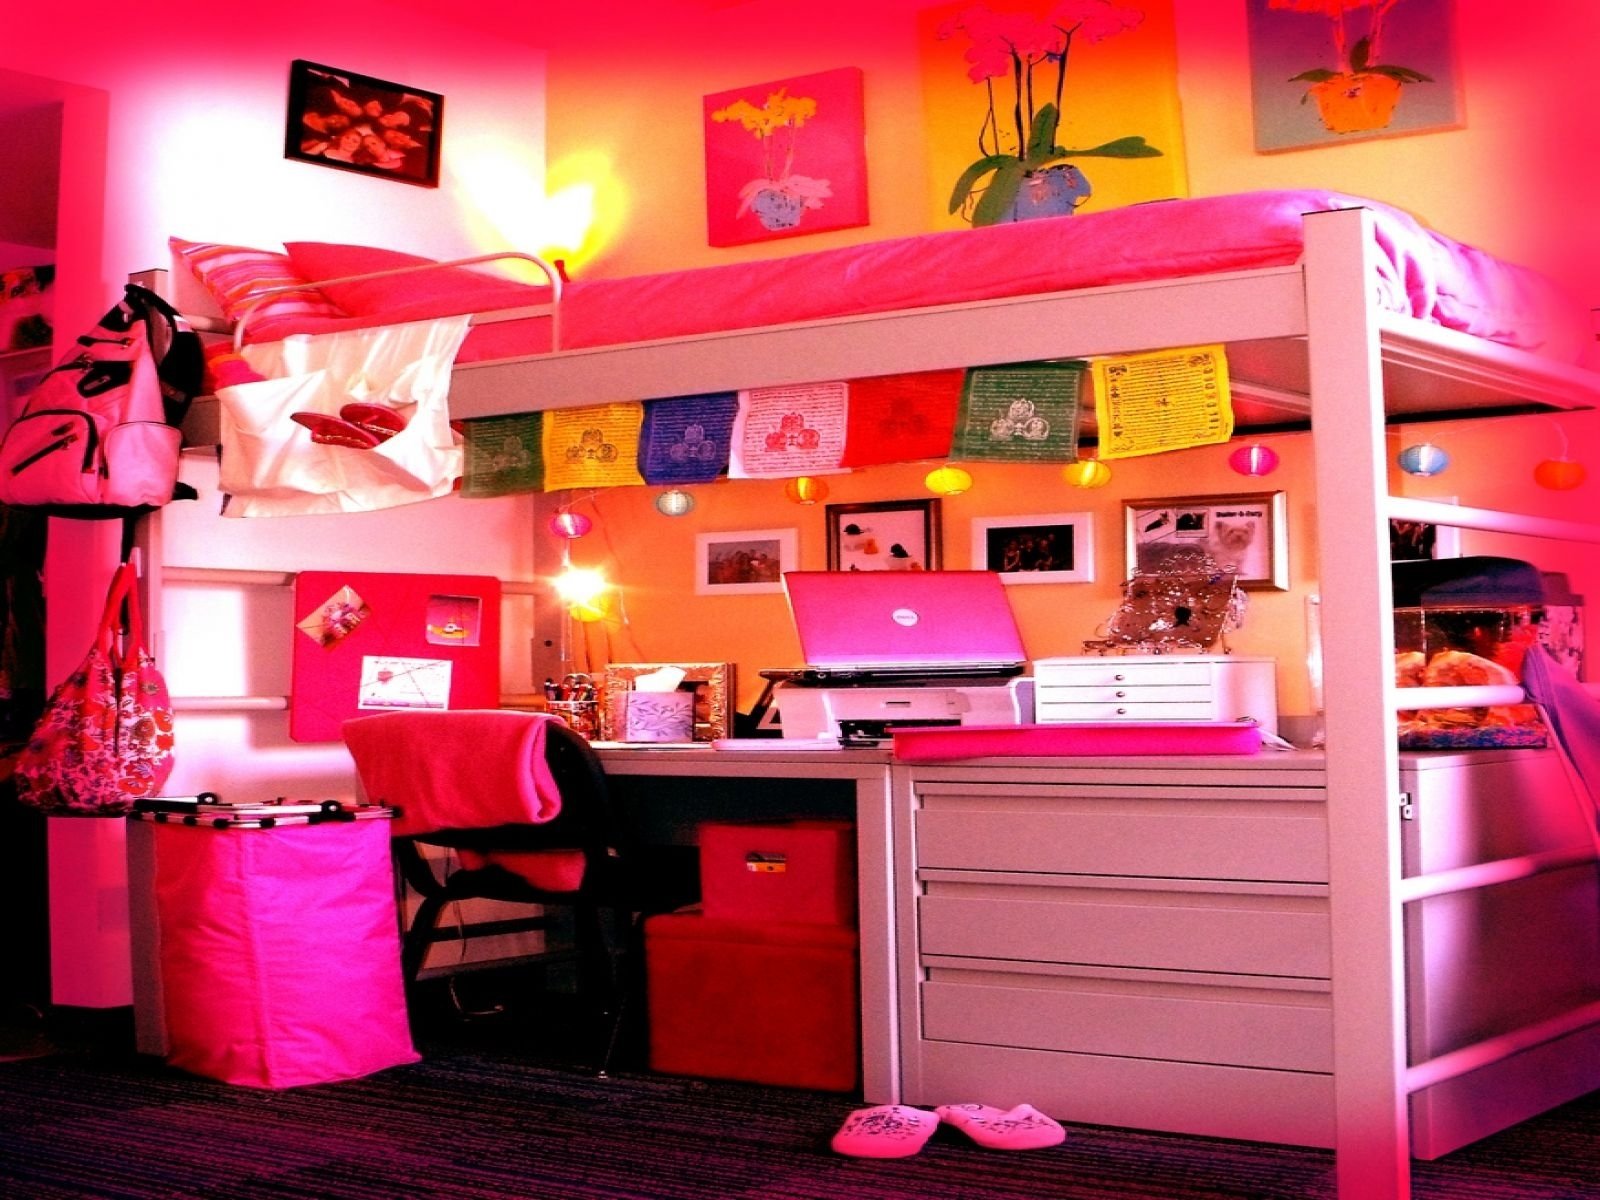 10 Stunning Cool Bedroom Ideas For Girls the cool bedroom ideas for 11 year olds above is used allow the 1 2022